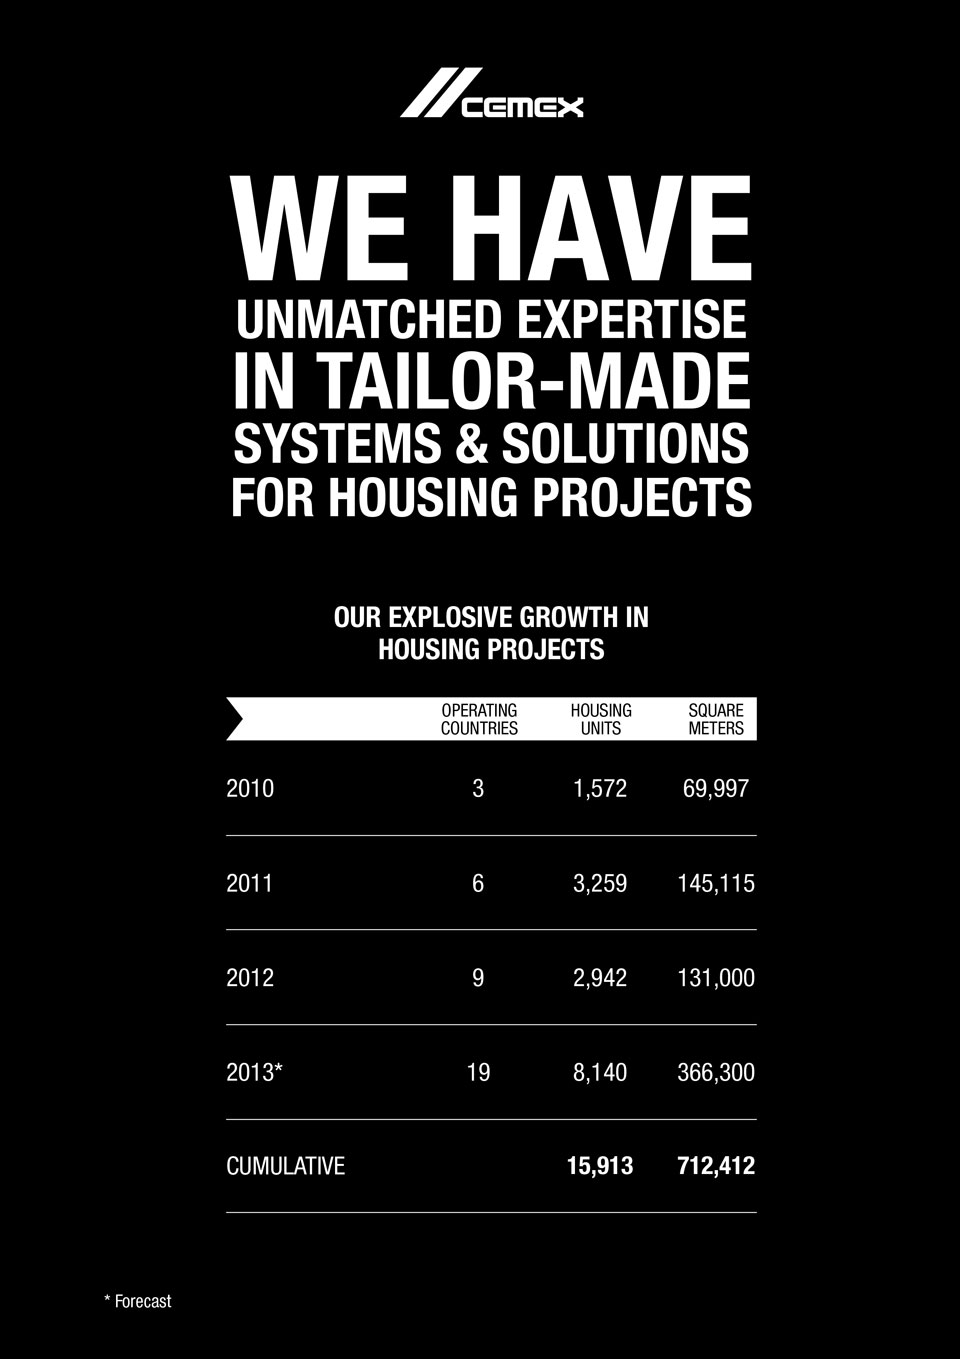 An image showing some statistics regarding the personalized projects throughout the years.